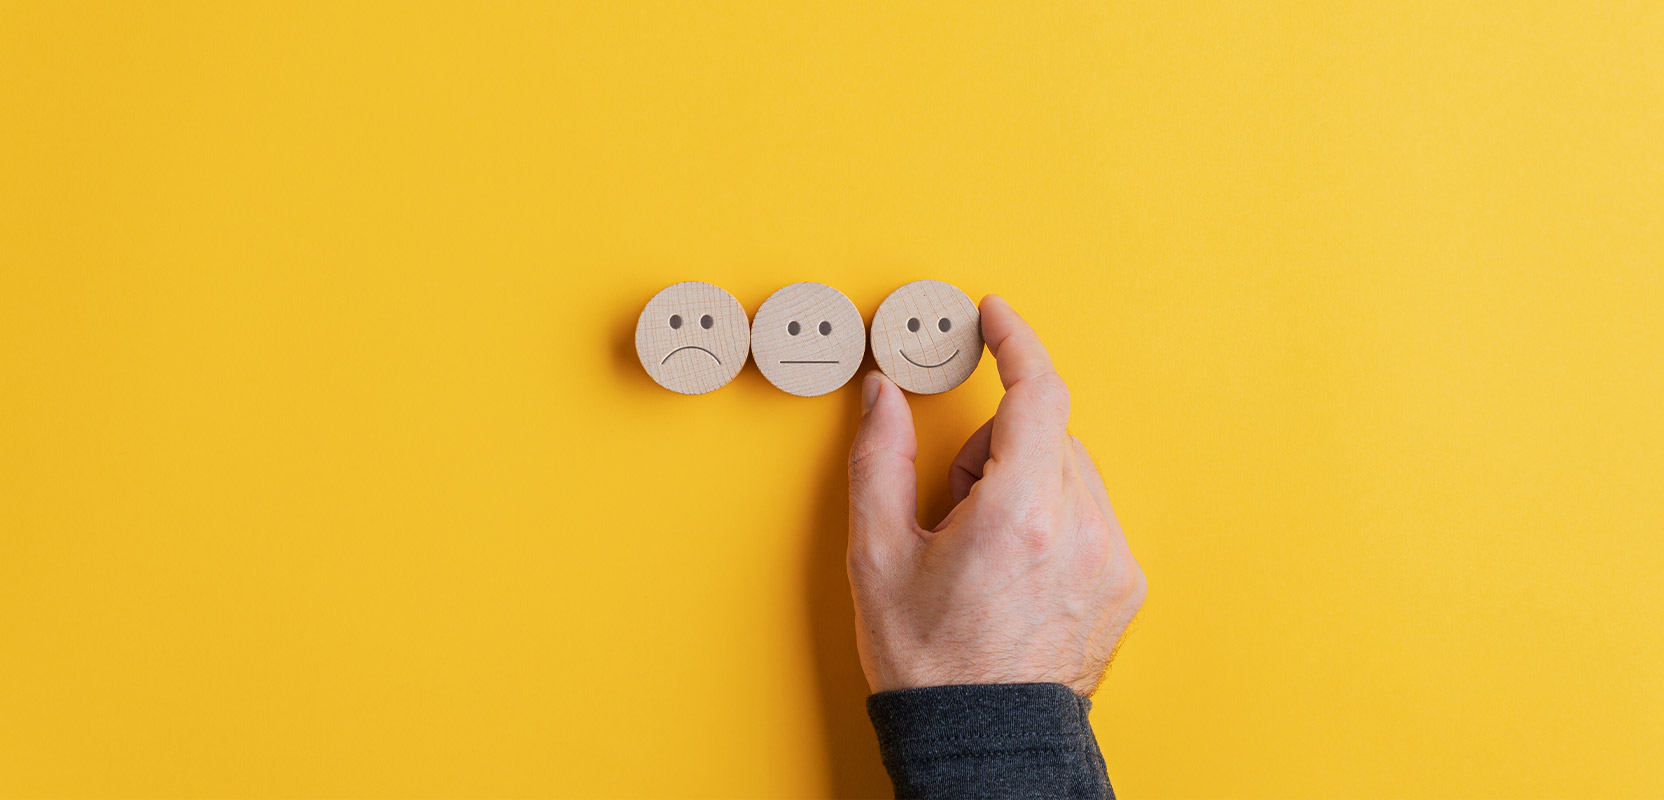 Three wooden blocks in the shape of faces with unhappy, neutral, and happy expressions, representing reviewing as an online side hustle